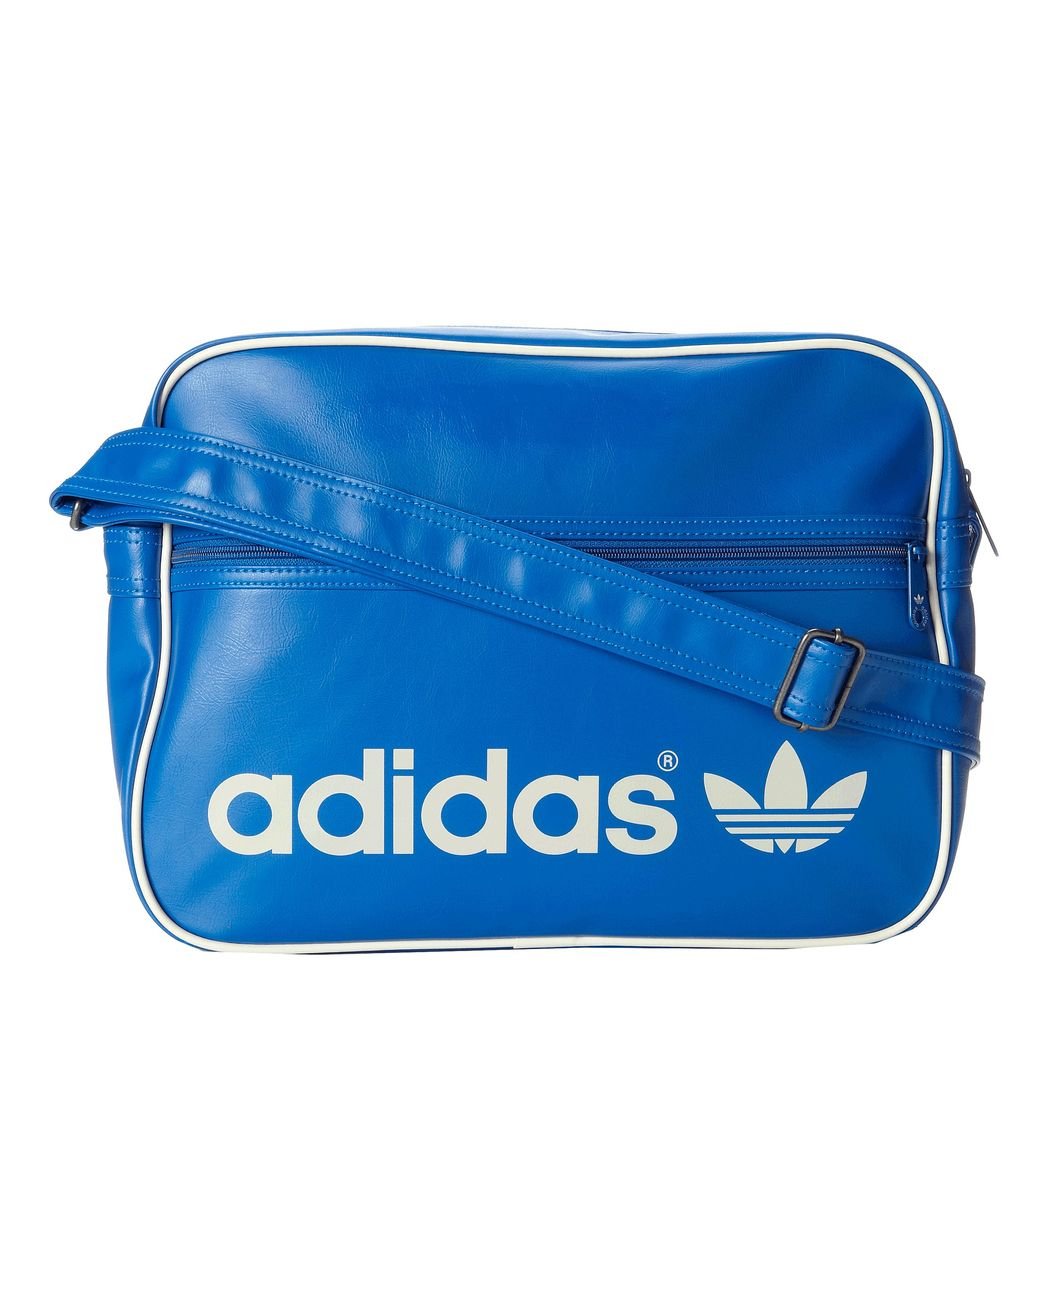 adidas Men's Bags at adidas Online Store | adidas Indonesia